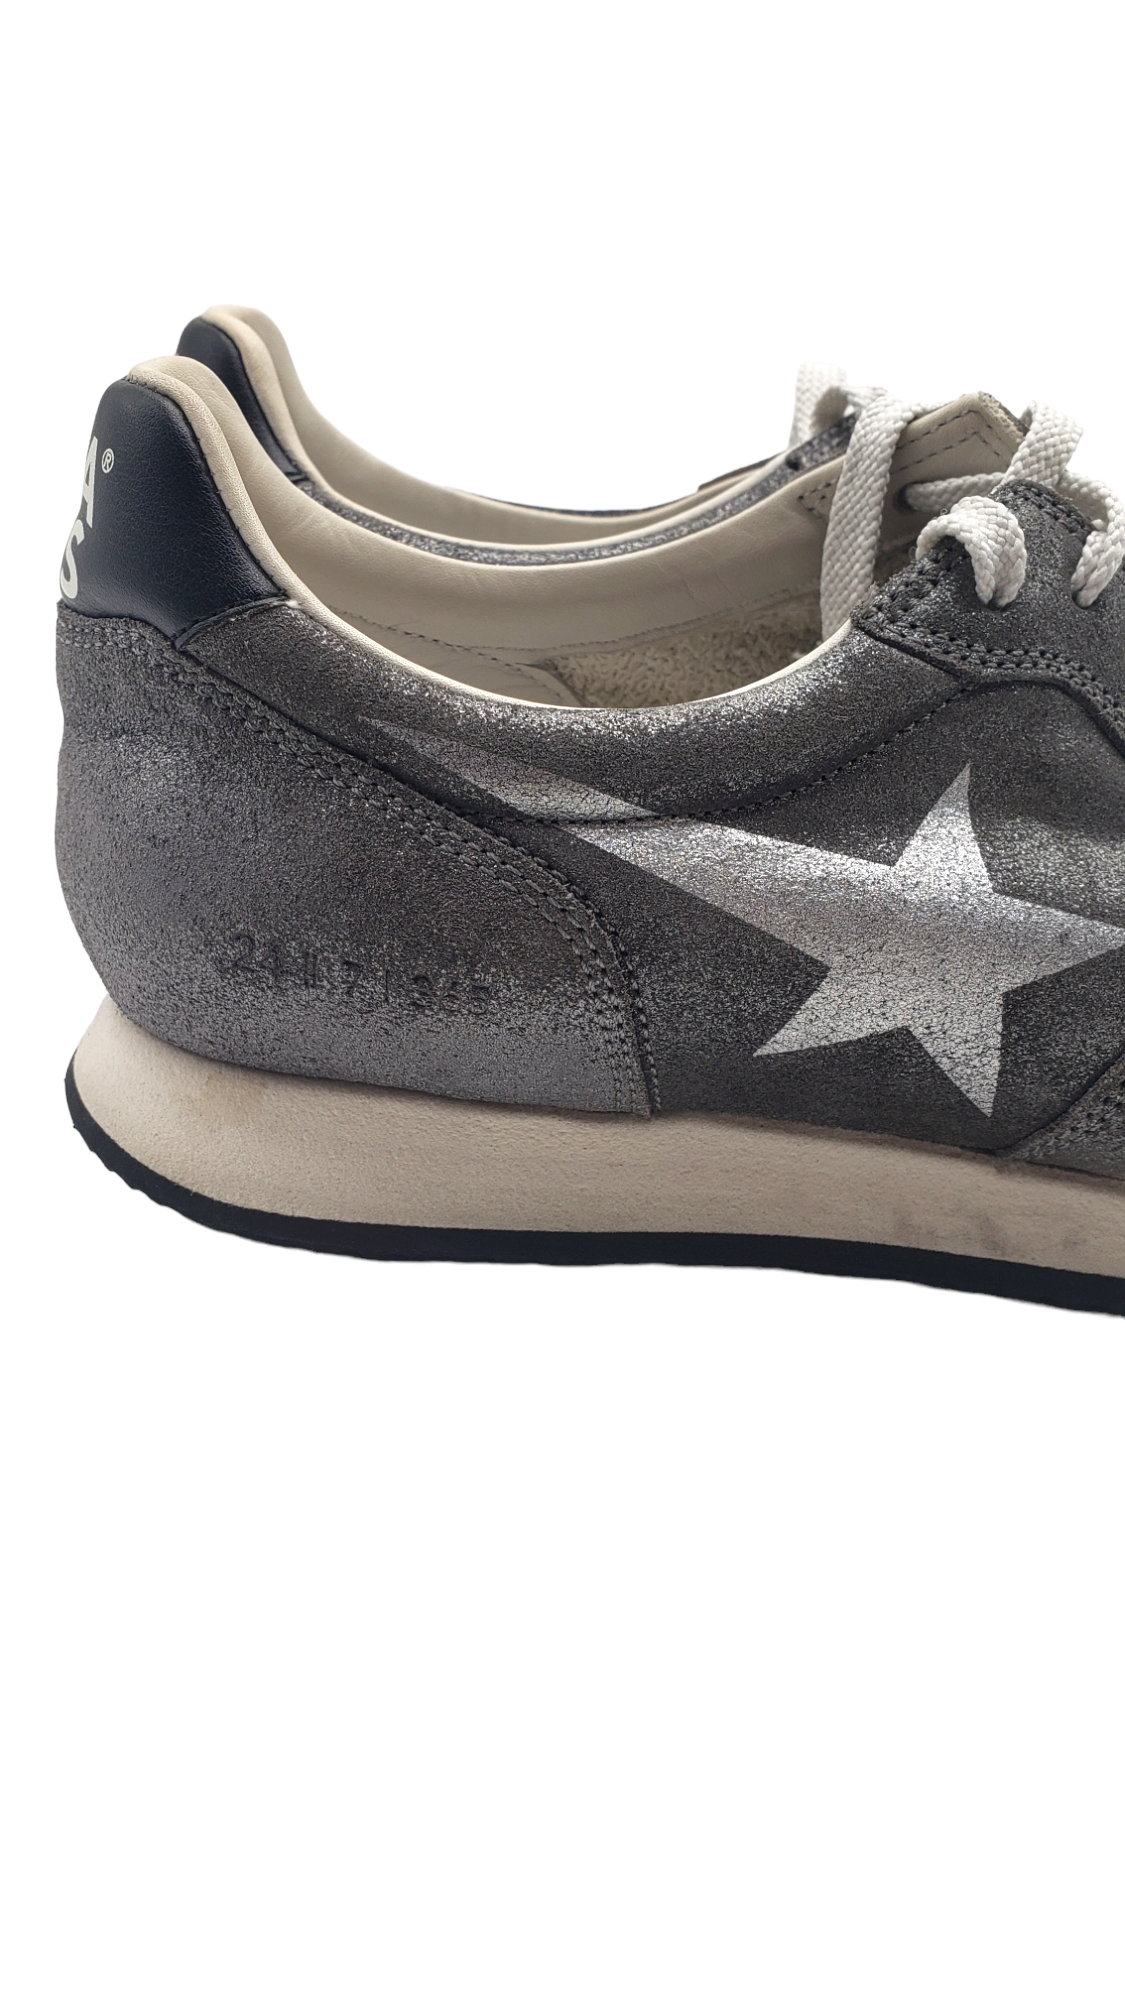 Golden Goose x Haus Silver Size 38 Sneakers